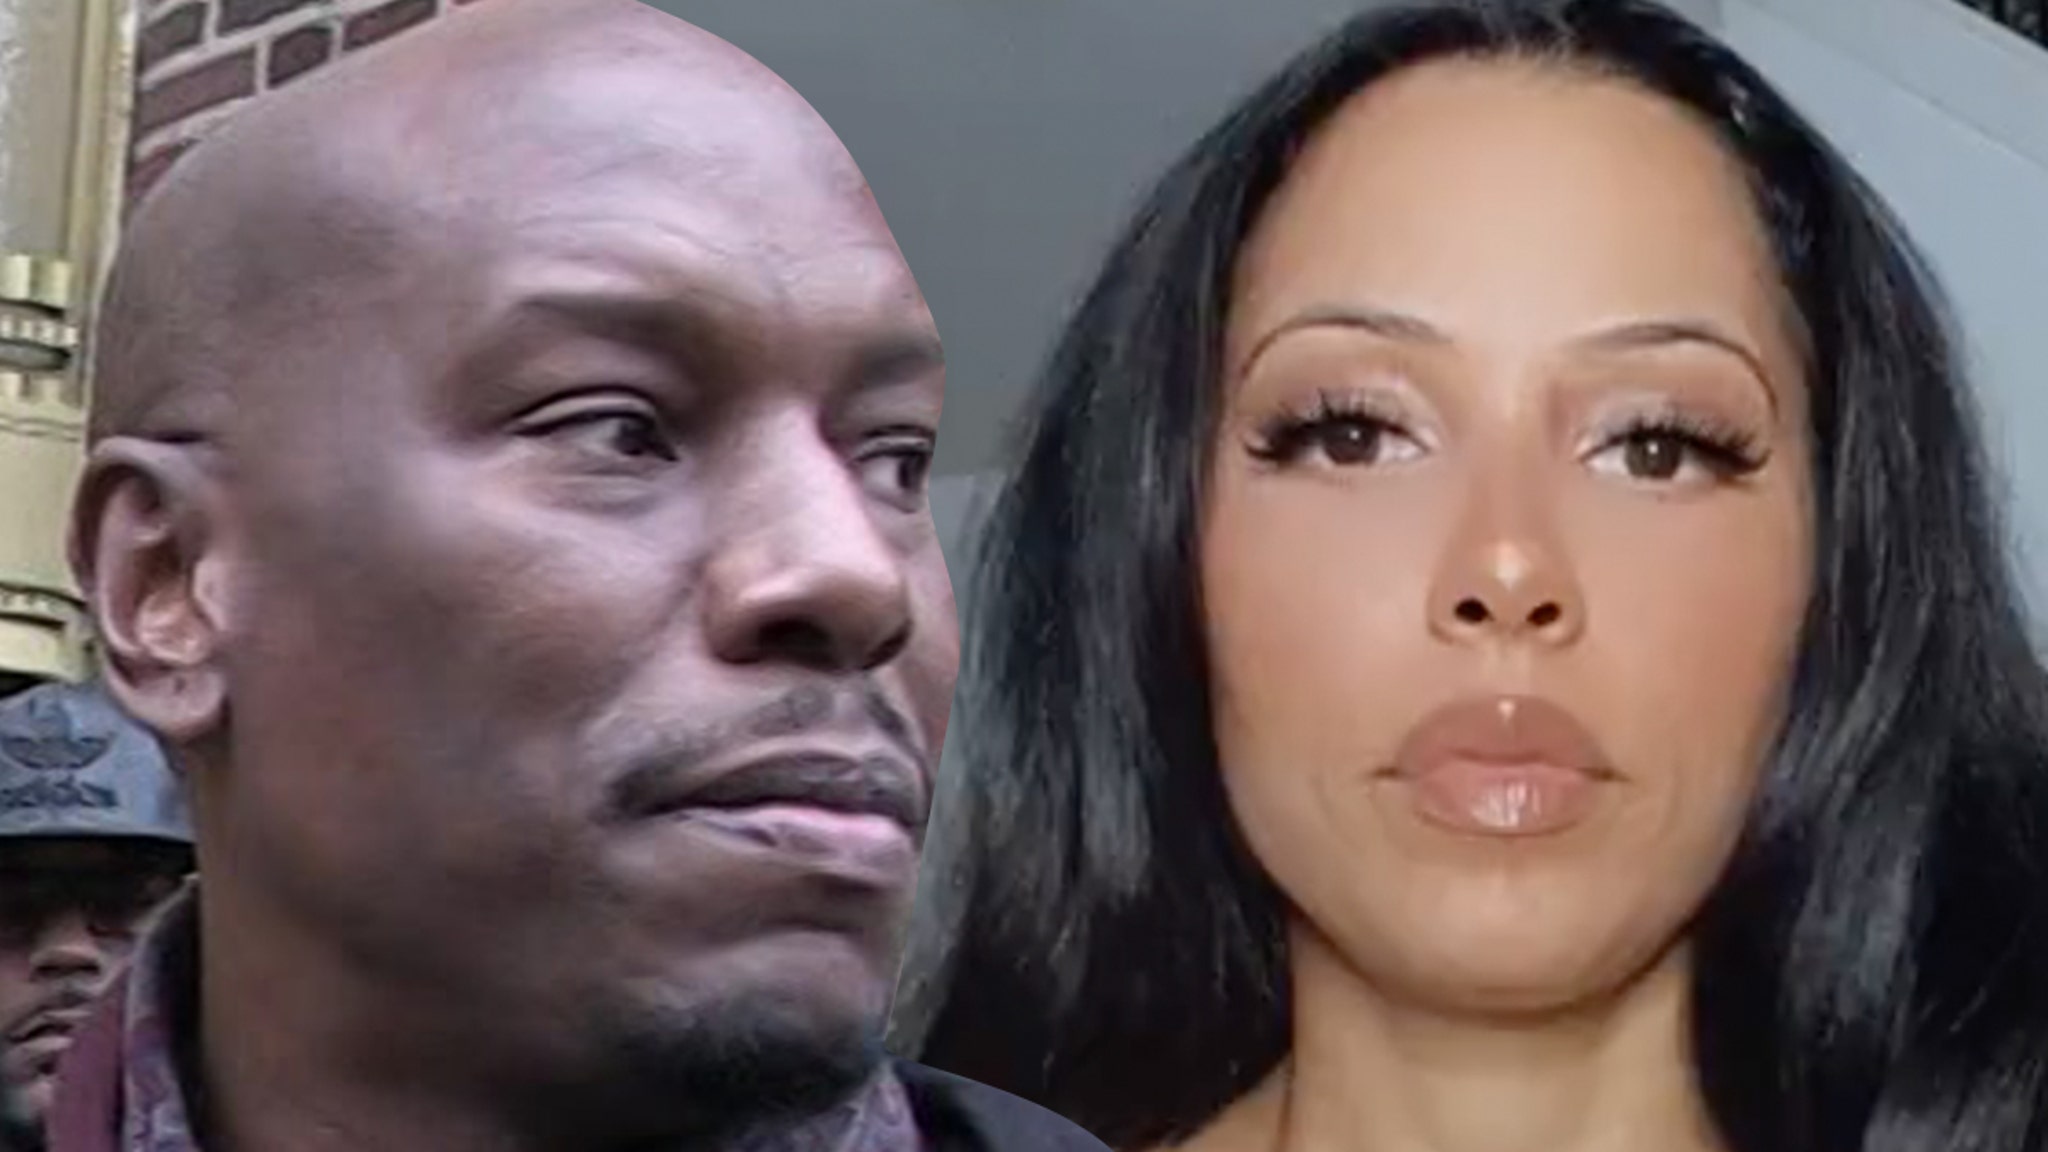 Tyrese doesn't want to pay alimony to his ex-wife in the event of a divorce